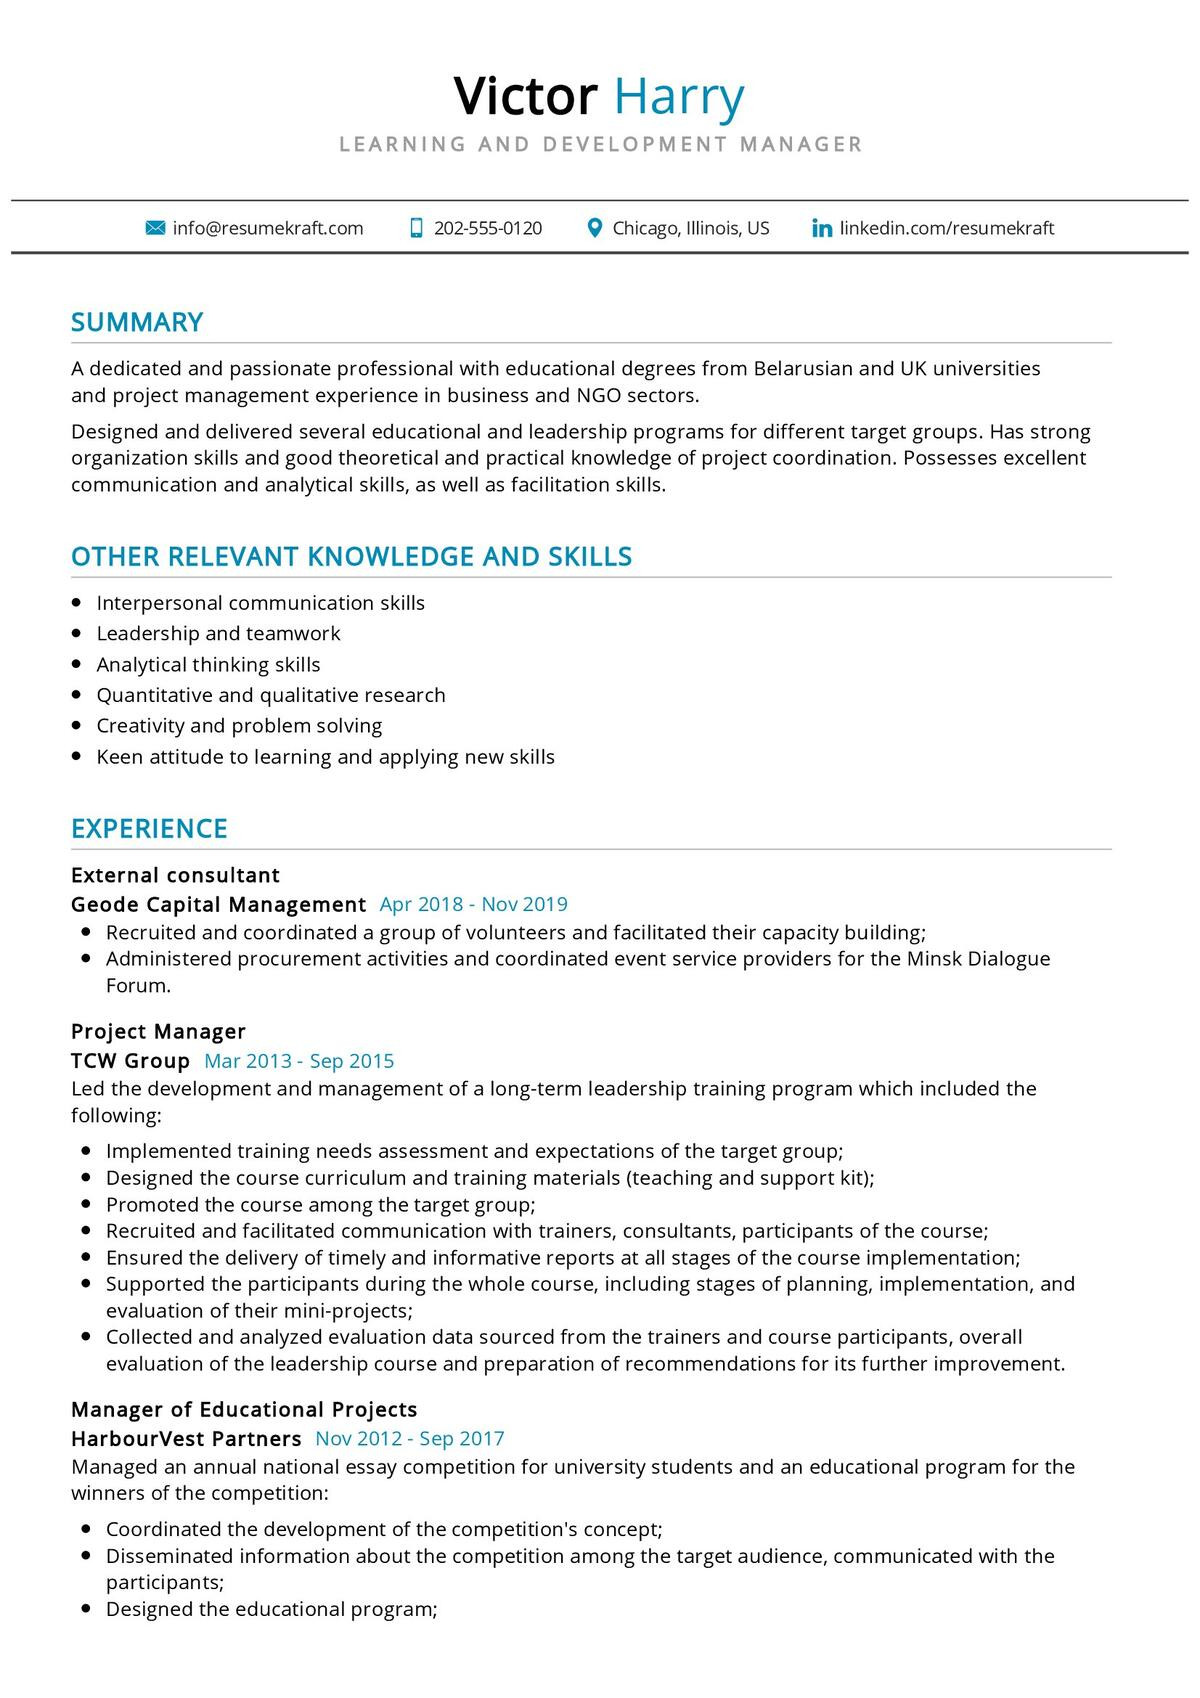 Training and Development Specialist Resume Sample Learning and Development Manager Resume 2021 Writing Guide …